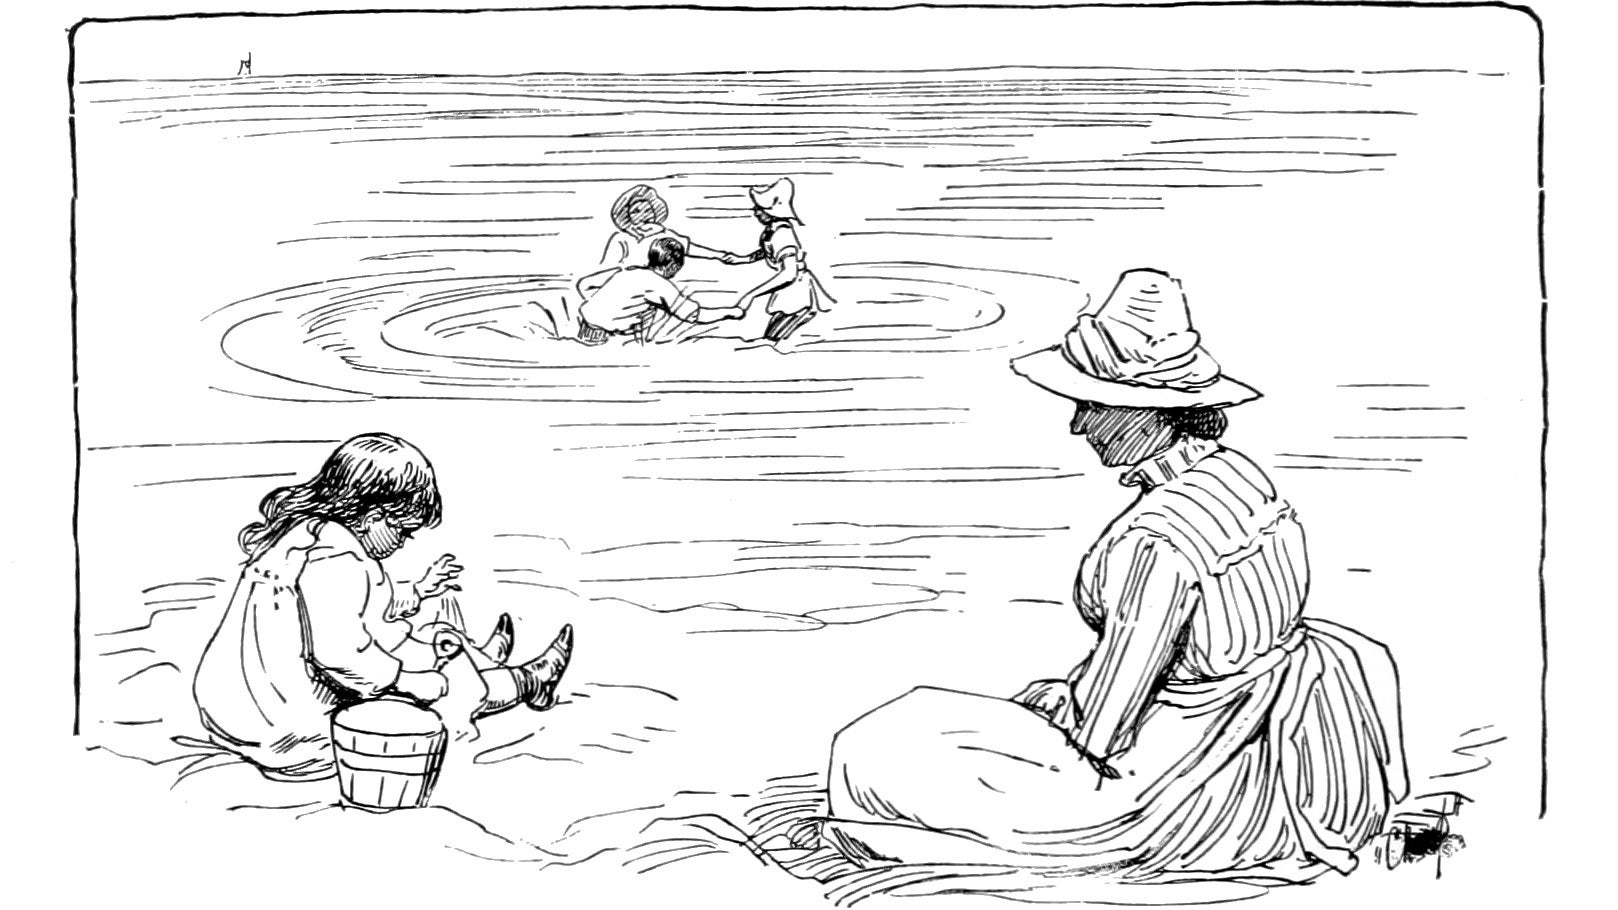 People at a beach playing in the sand and splashing in the water in an illustration from 'Three Vassar Girls on the Rhine'.